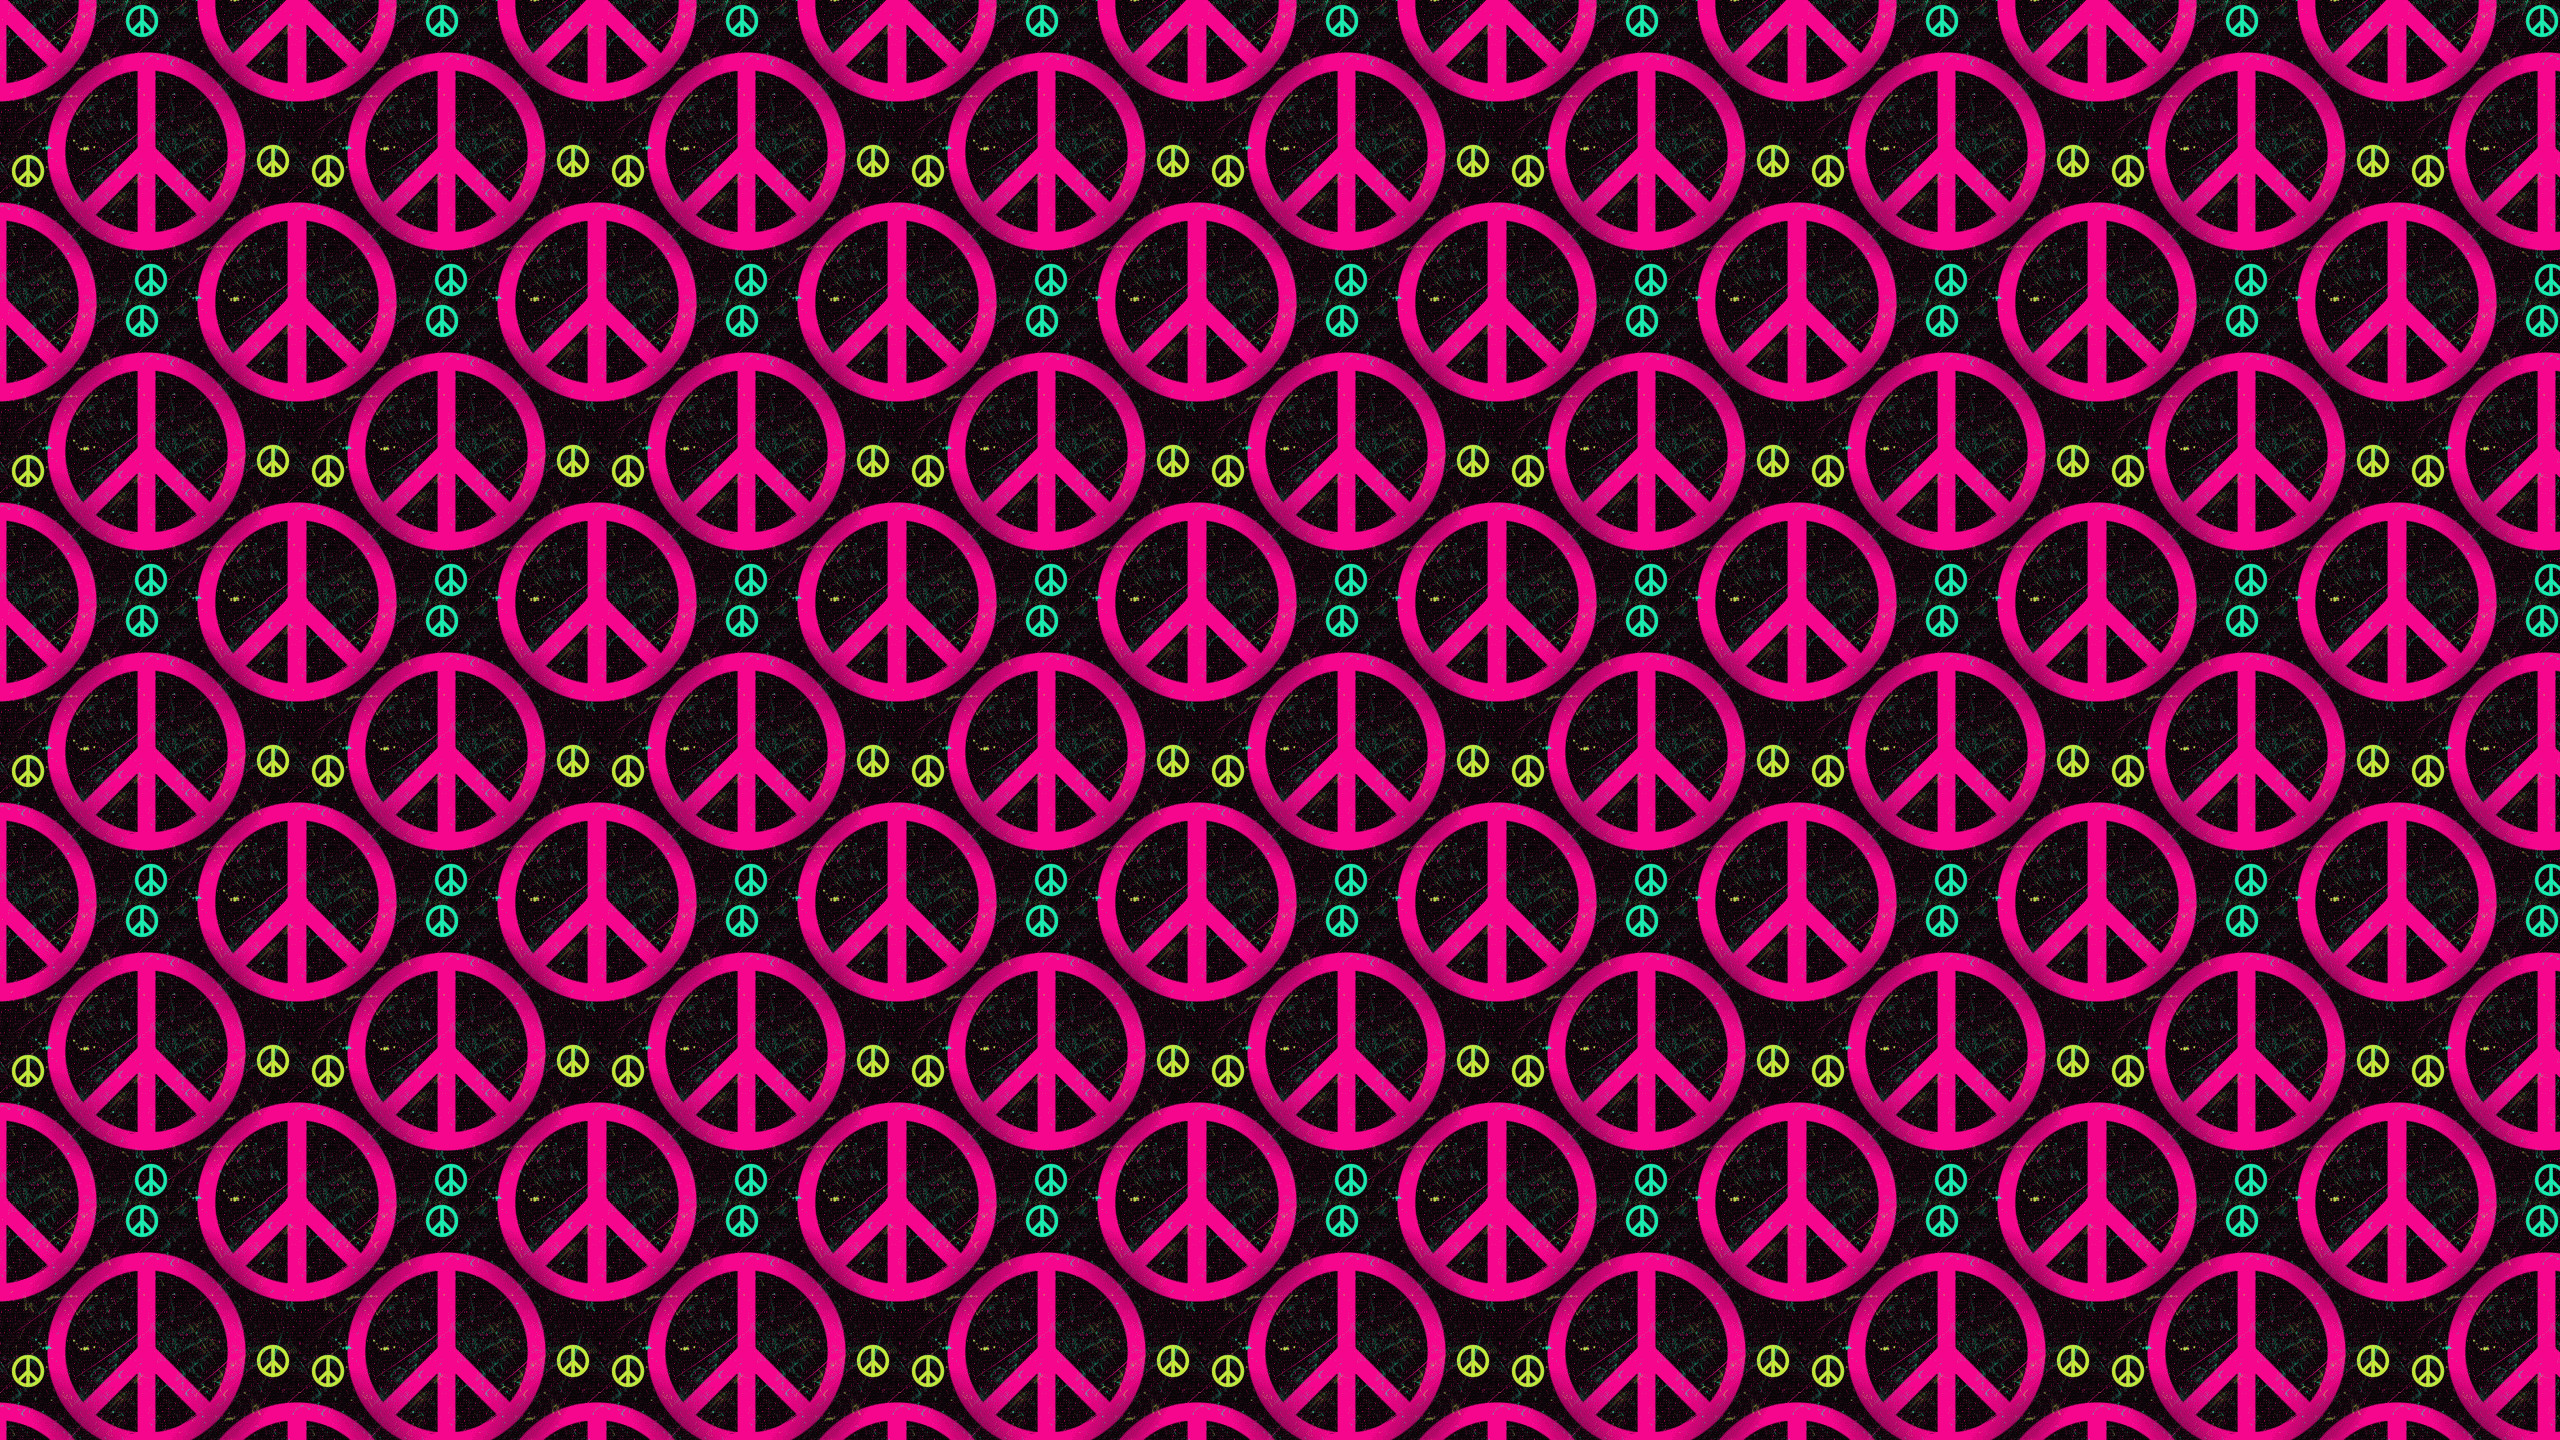 2560x1440 ... 25 Great Peace Backgrounds | CreativeFan Peace Sign ...